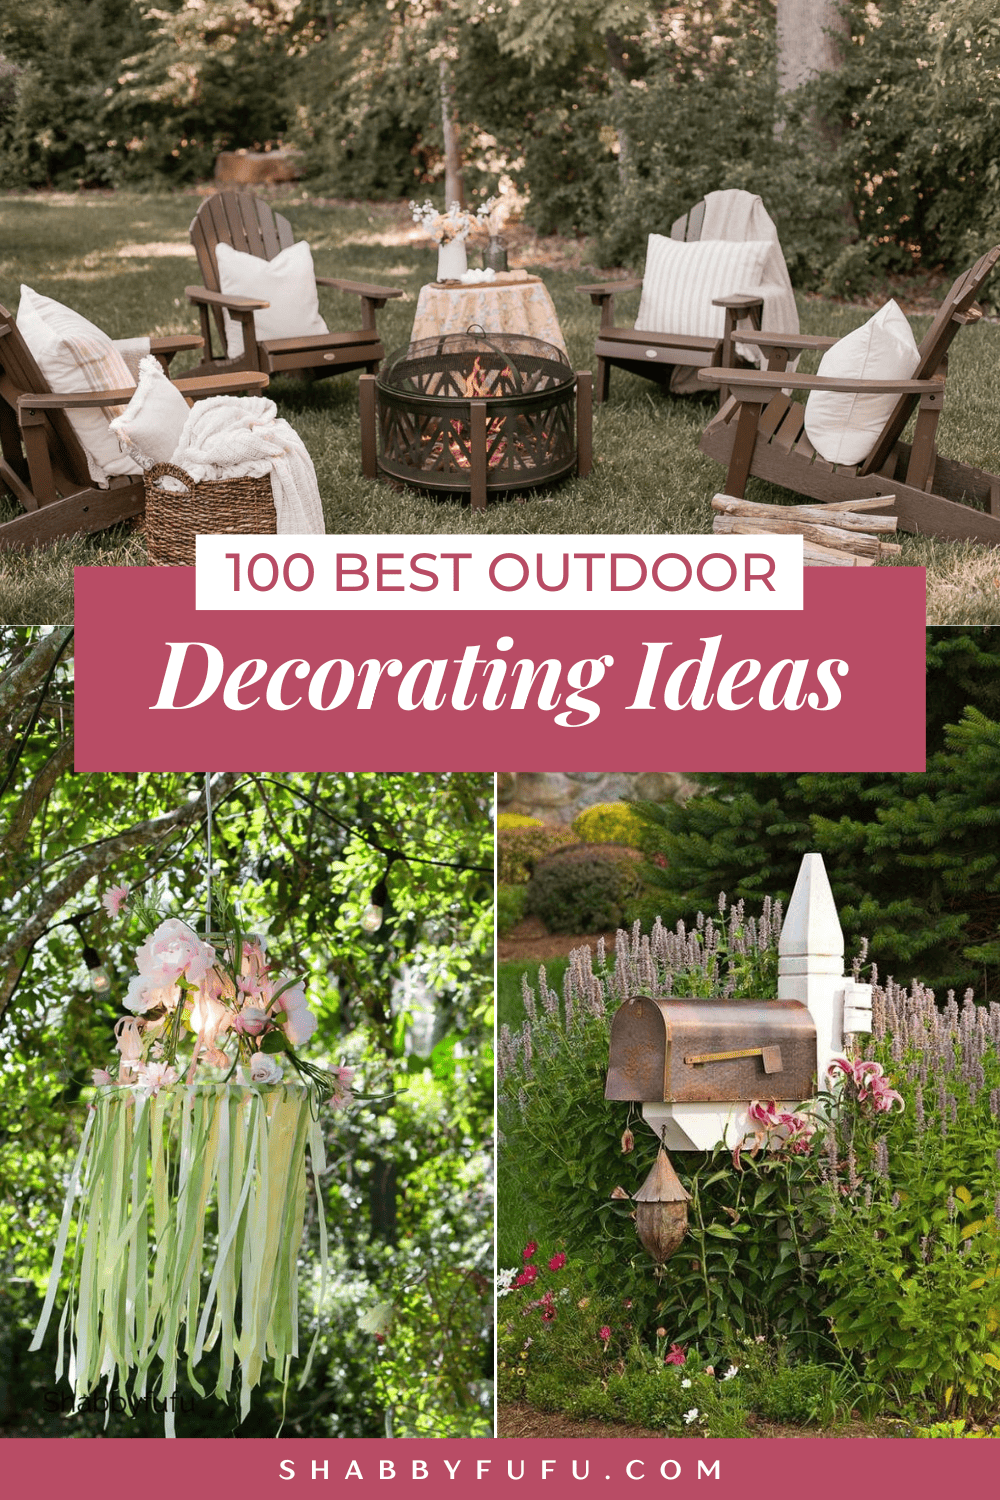 Pinterest decorative graphic titled "100 Best Outdoor Decorating Ideas"